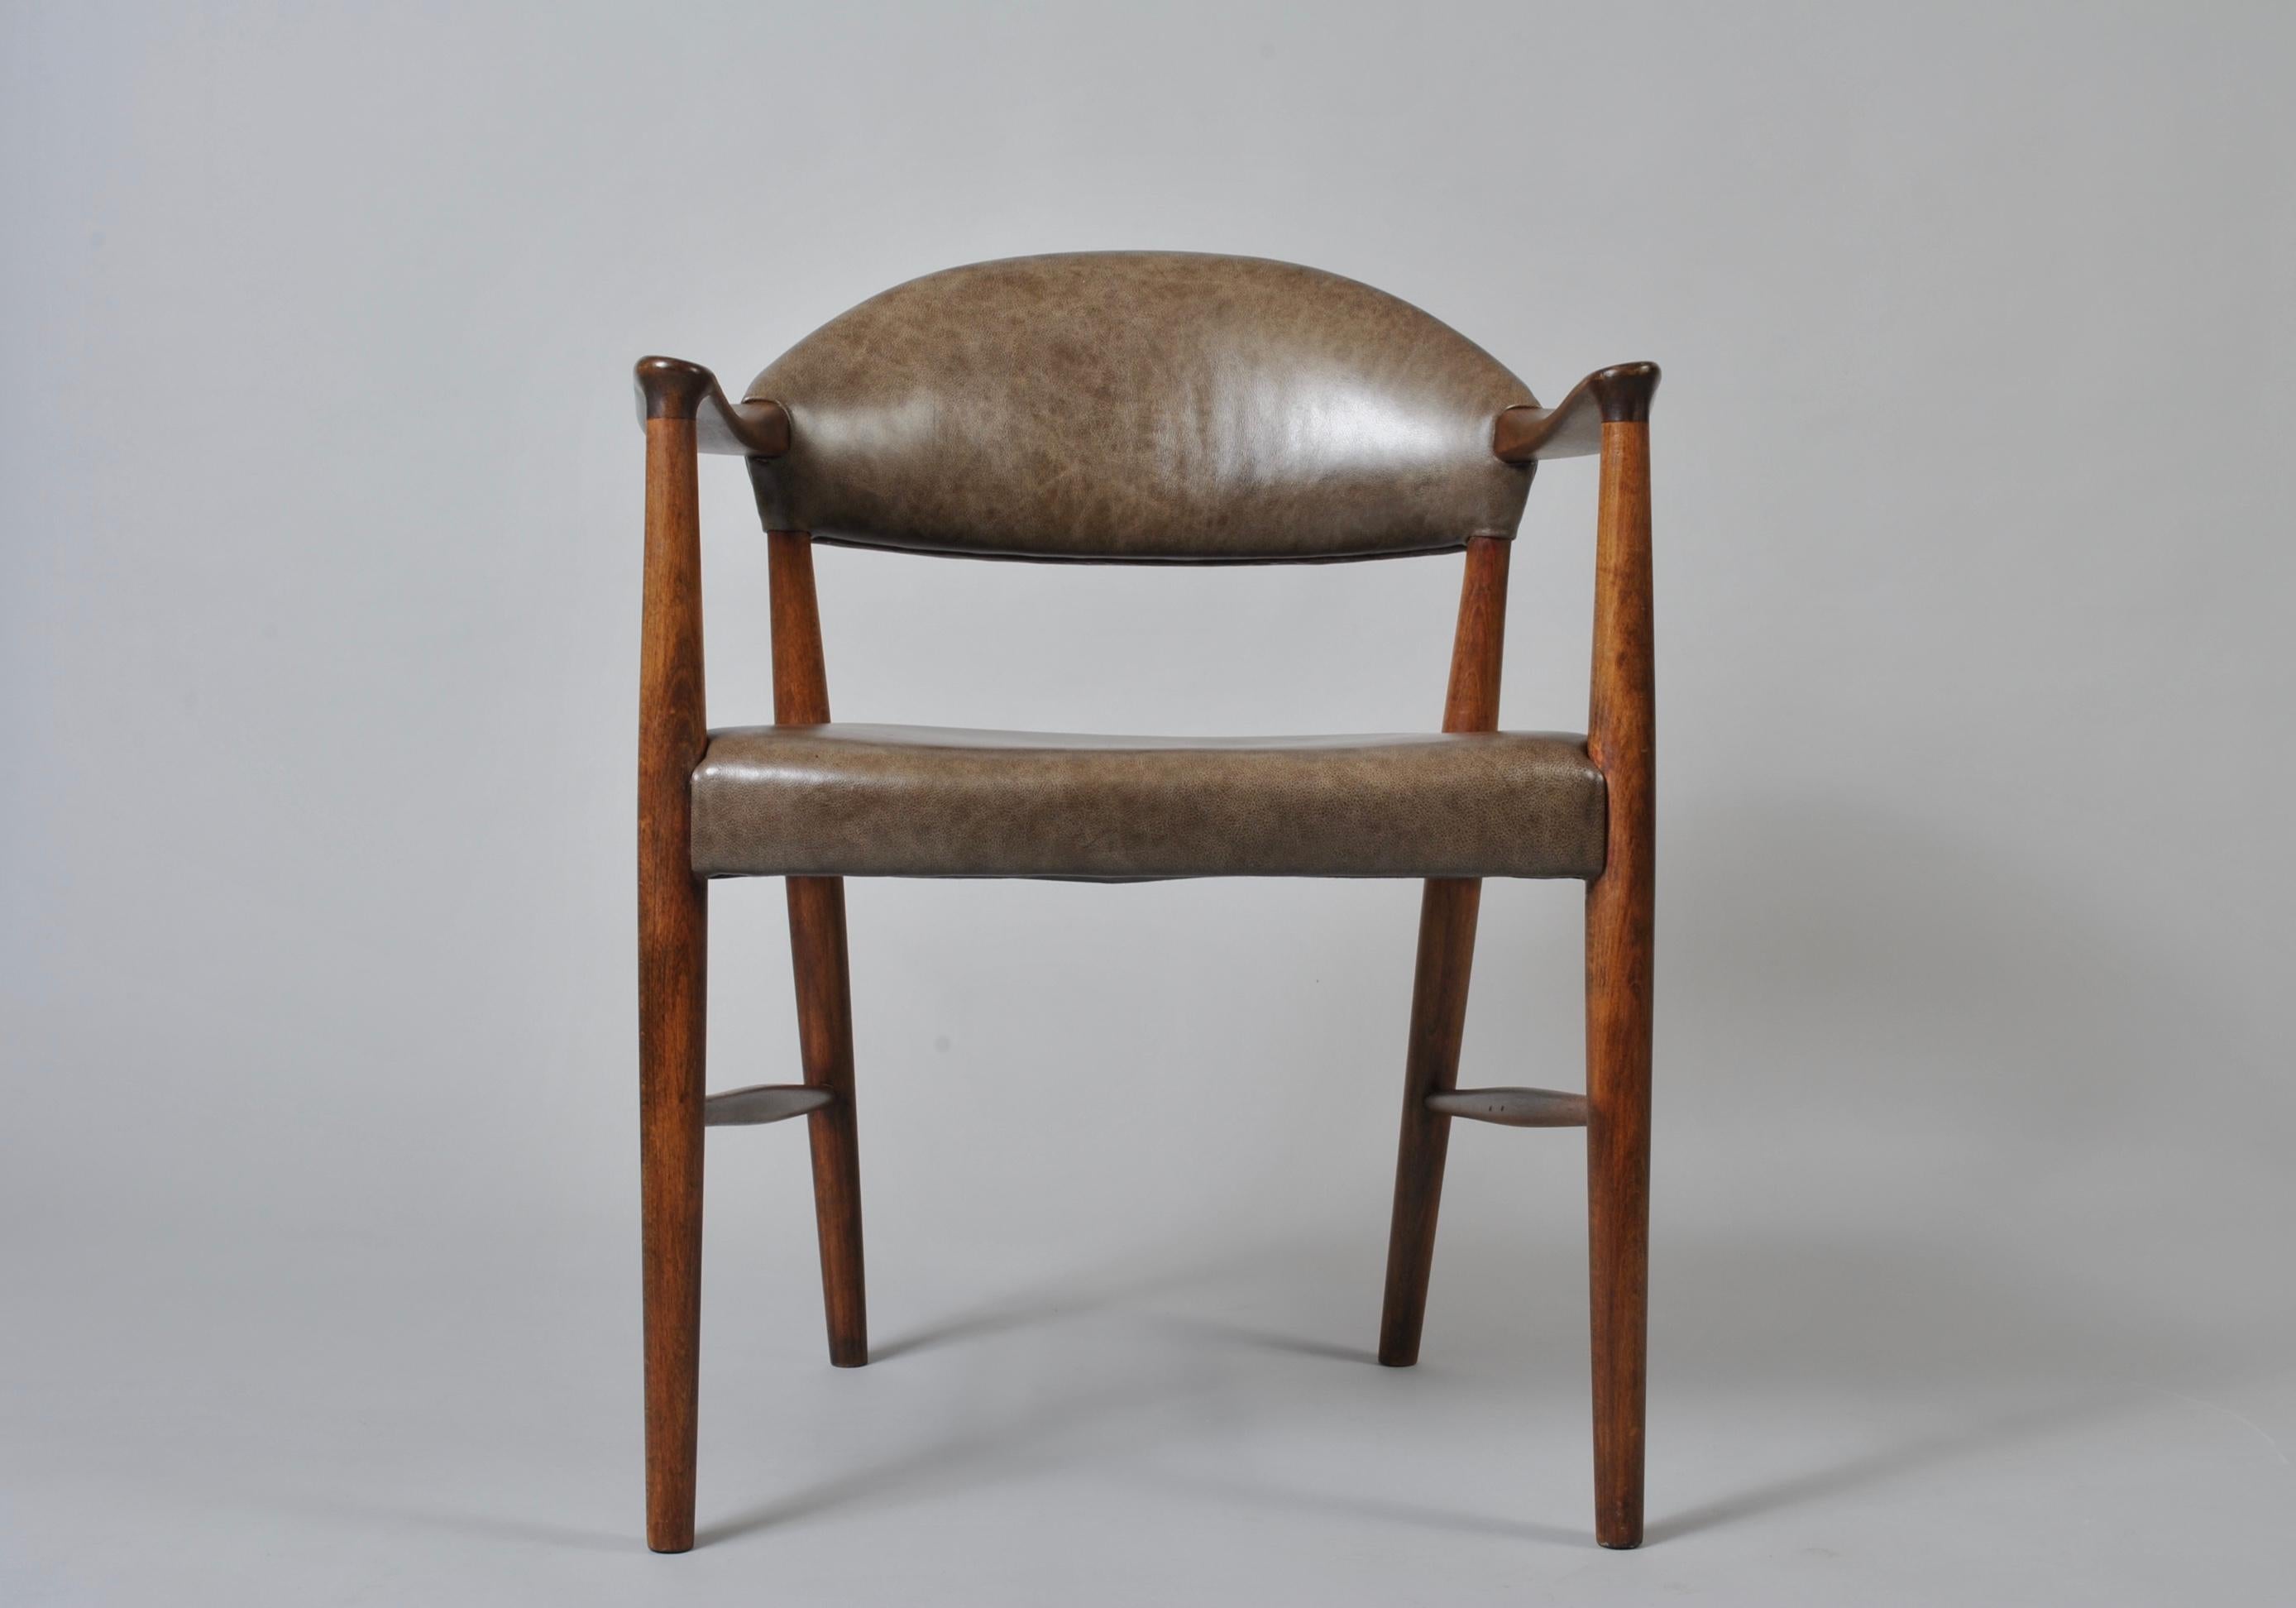 A Classic midcentury Danish Kurt Olsen elbow chair in Italian leather upholstery. Produced in Denmark, circa 1950s.
Dark finished beech polished frame.
Extremely comfortable.